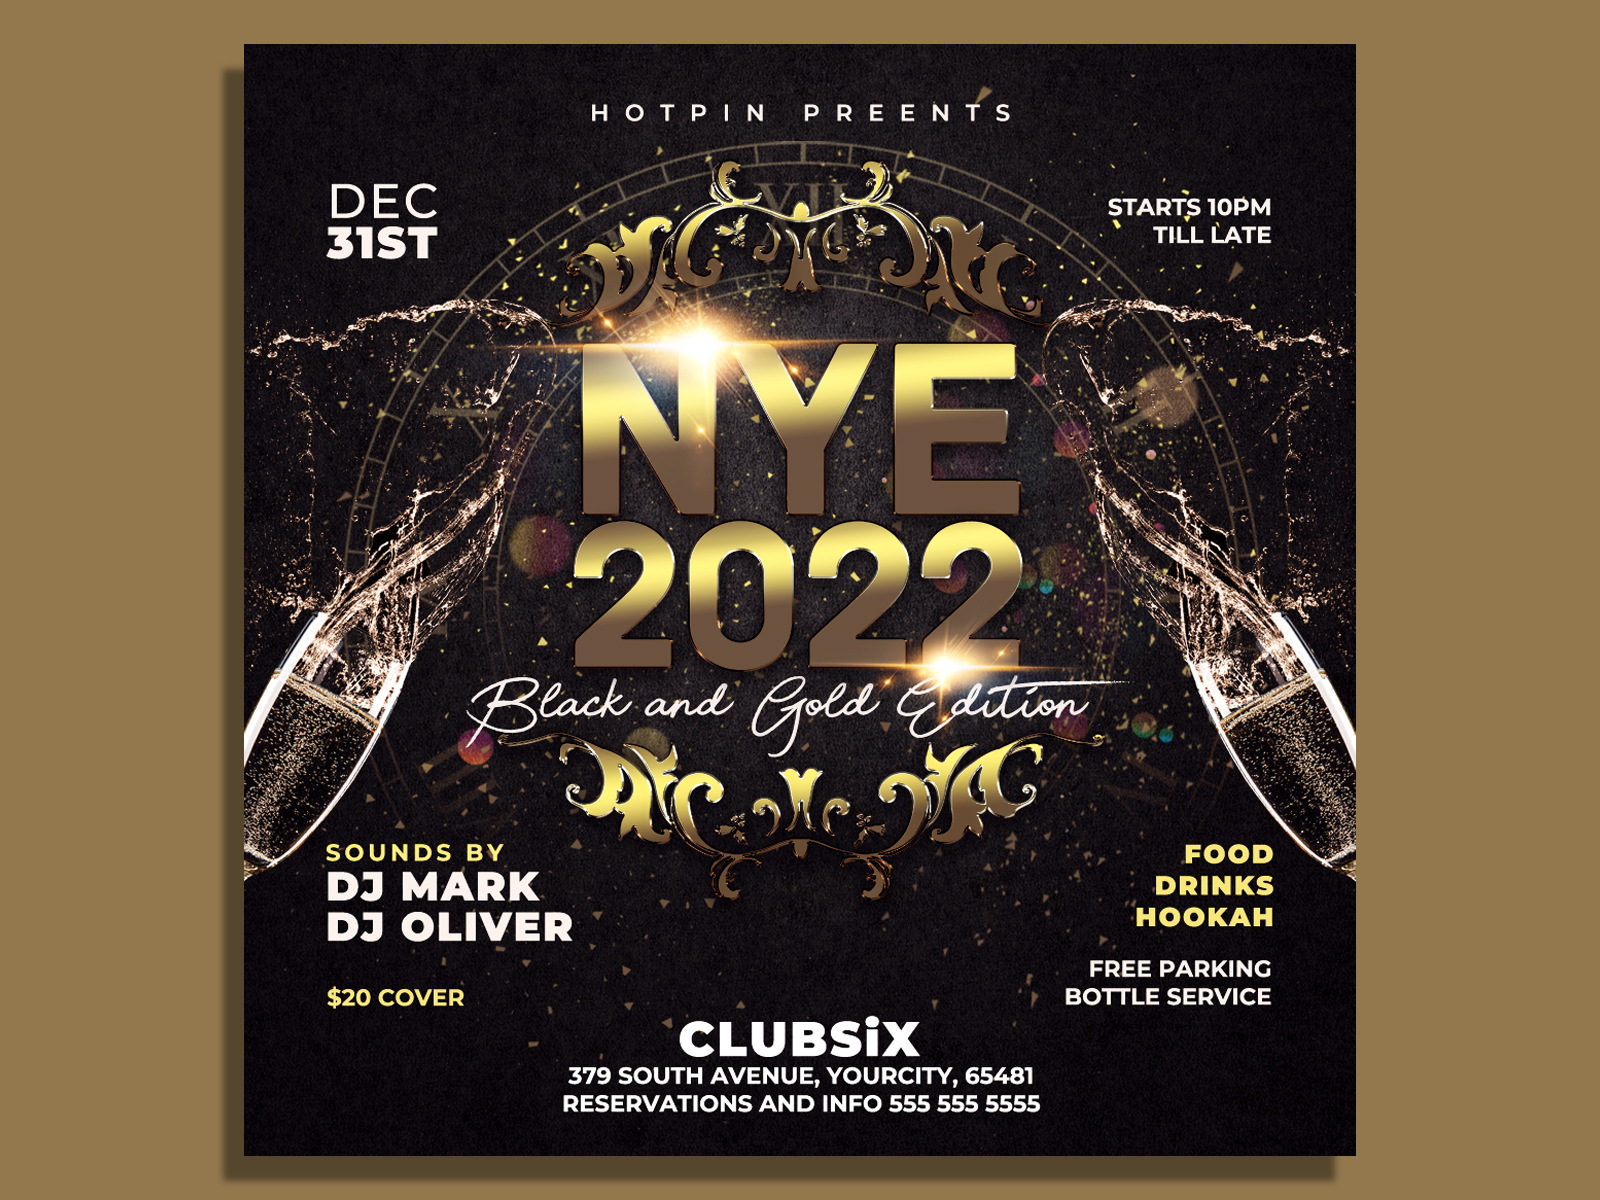 New Year Eve Flyer Template by Hotpin on Dribbble